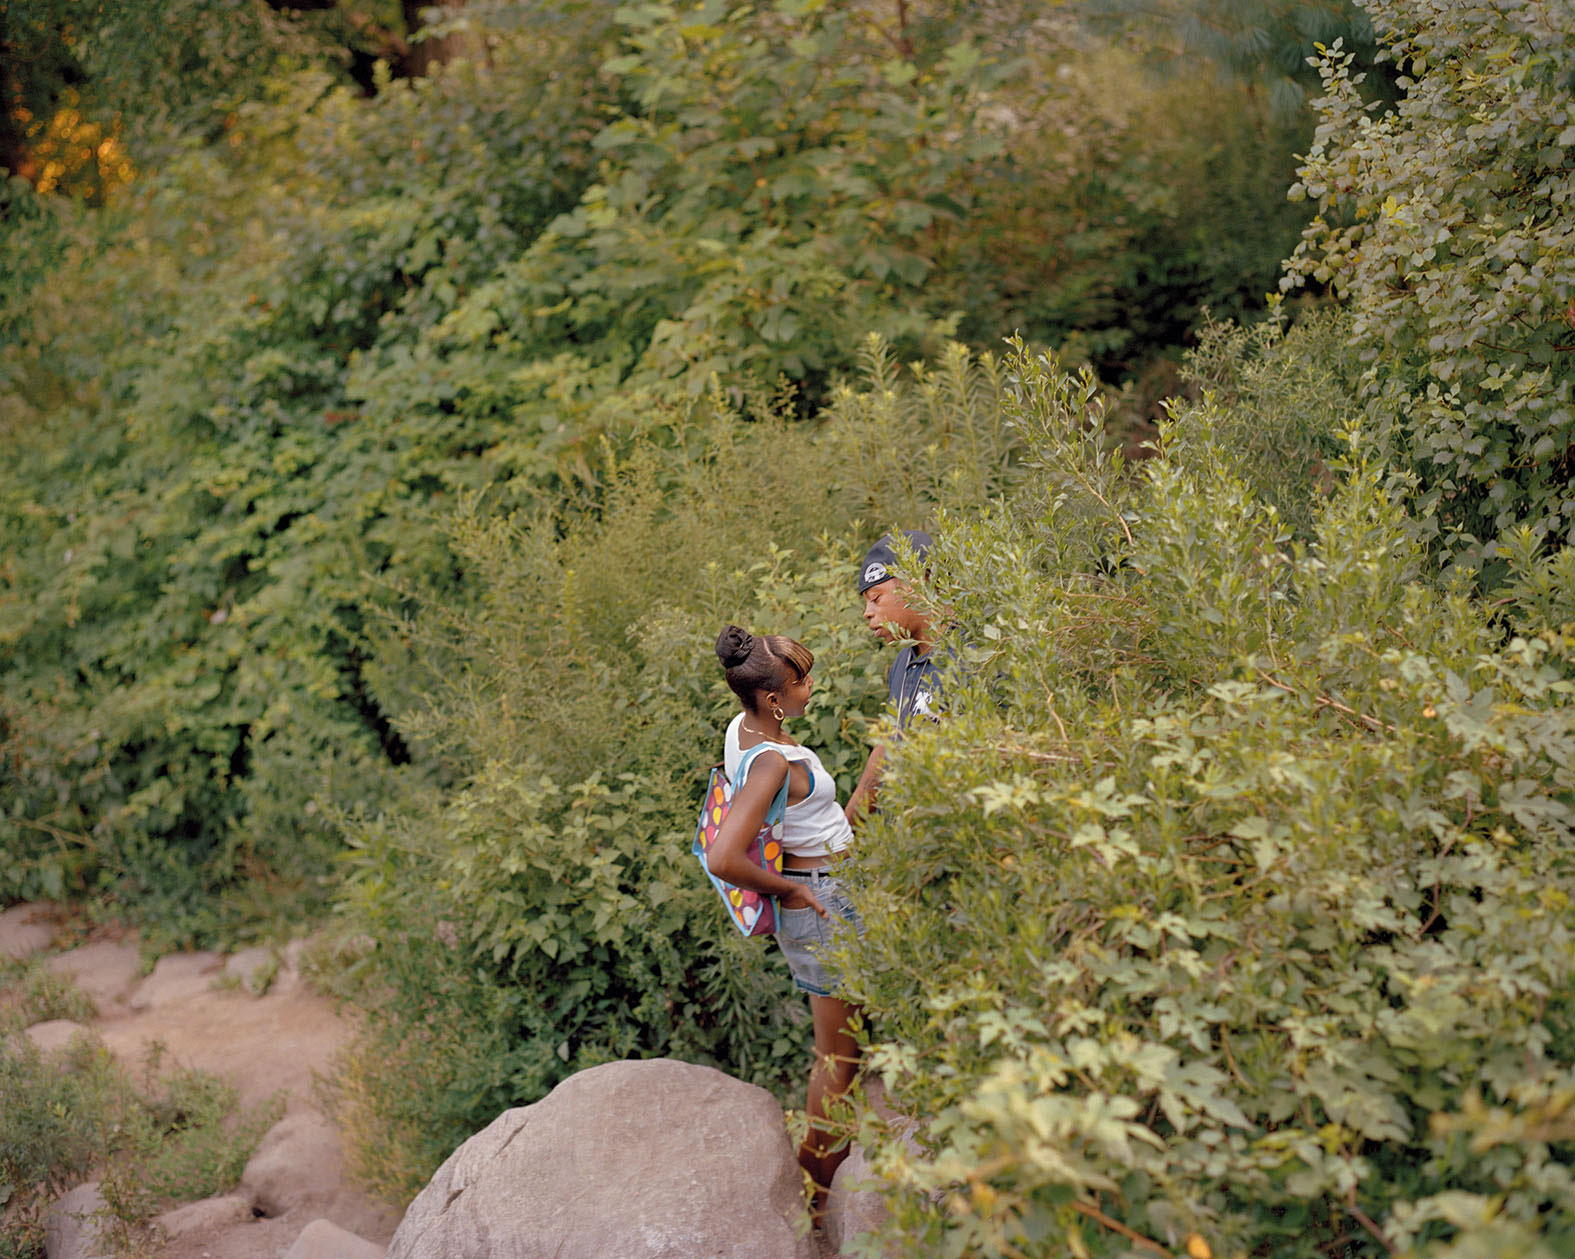 A couple talks, partially obscured by shrubs, in a green and overgrown area of the park